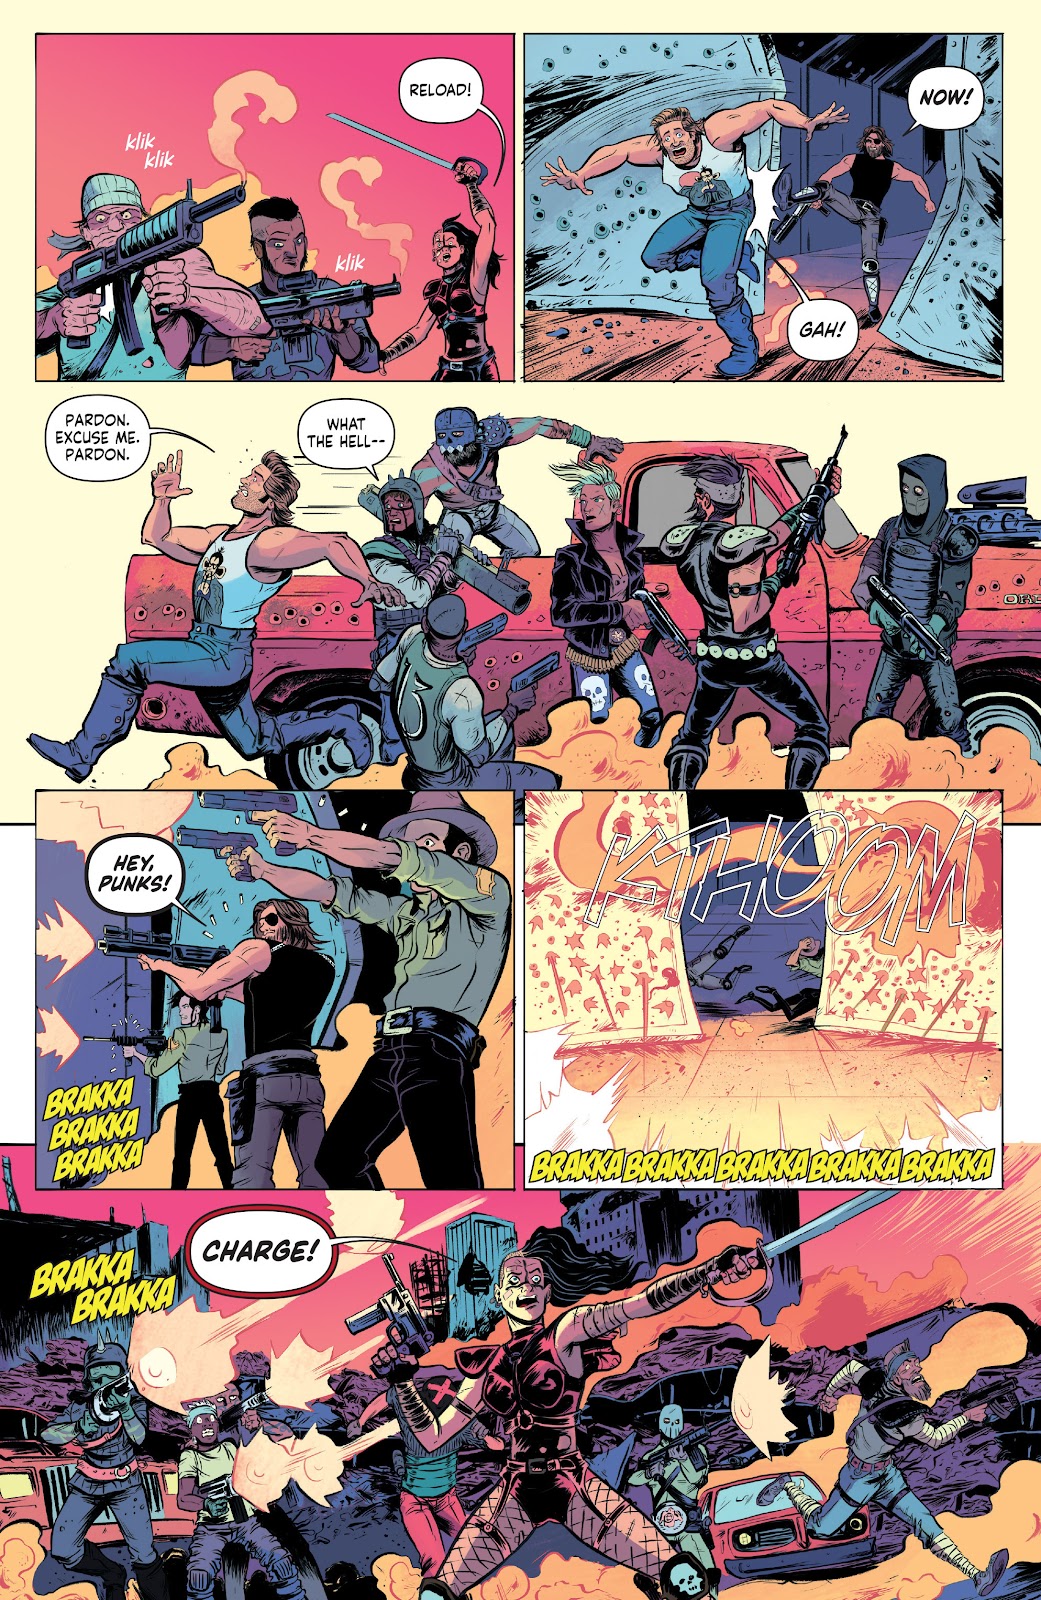 Big Trouble in Little China / Escape from New York issue 2 - Page 21